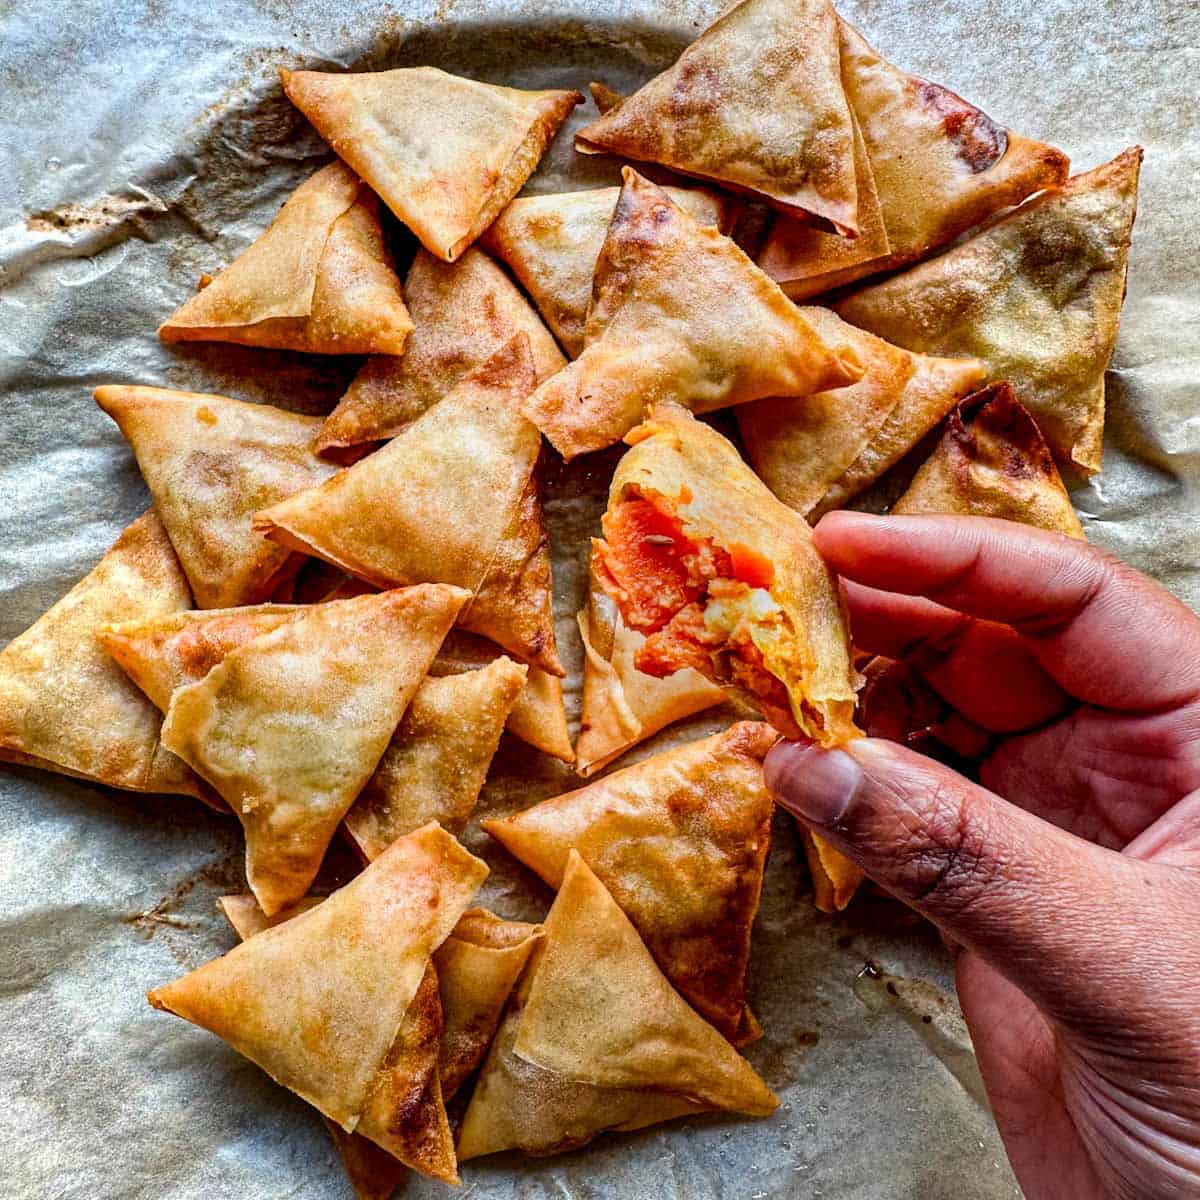 Lots of mini sweet potato samosas on a parchment lined plate. One samosa is torn open with the sweet potato filling showing.